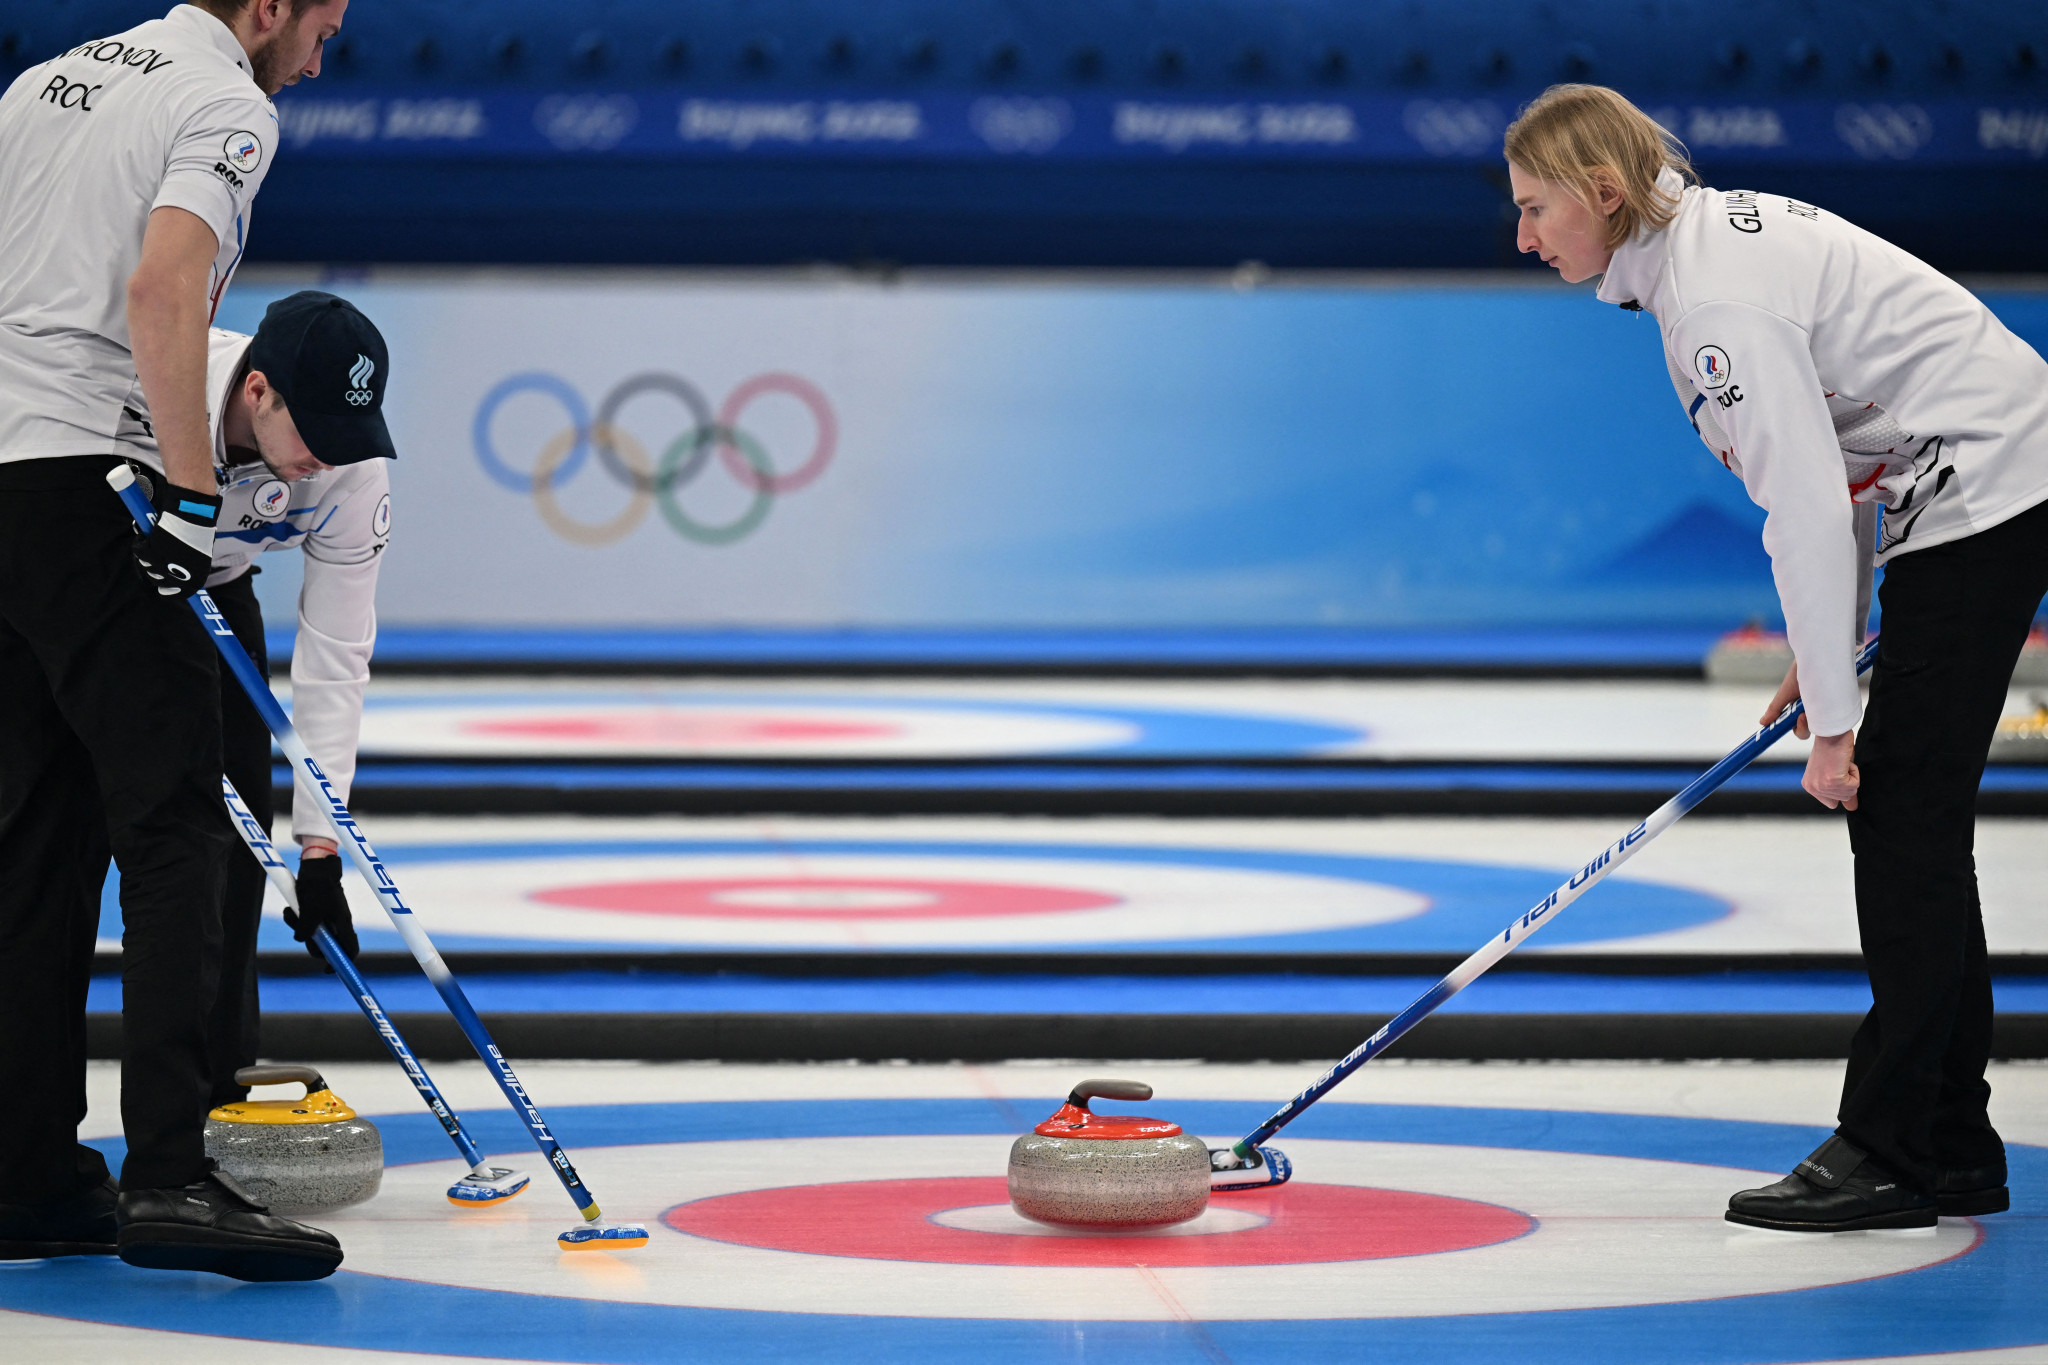 The Russian Olympic Committee men's team finished eighth at the Beijing 2022 Winter Olympics in the curling competition ©Getty Images